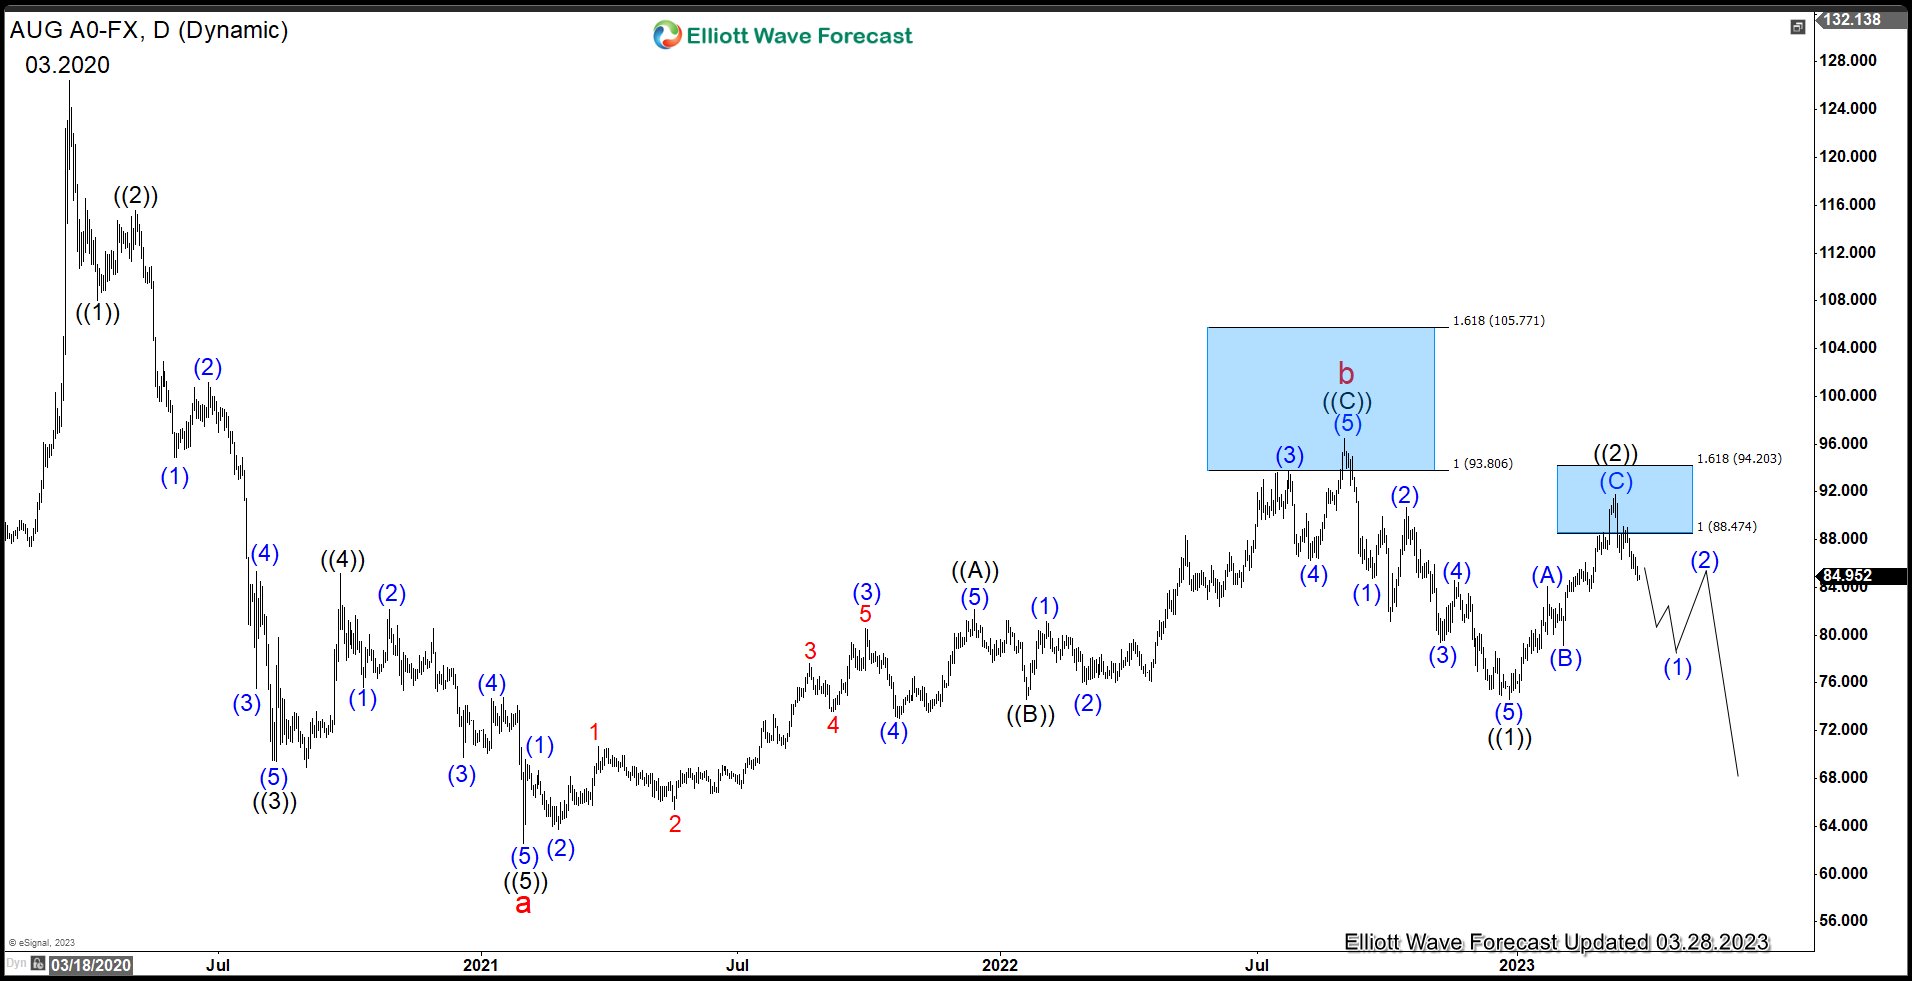 Gold-to-Silver (AUG) Daily Elliott Wave Chart